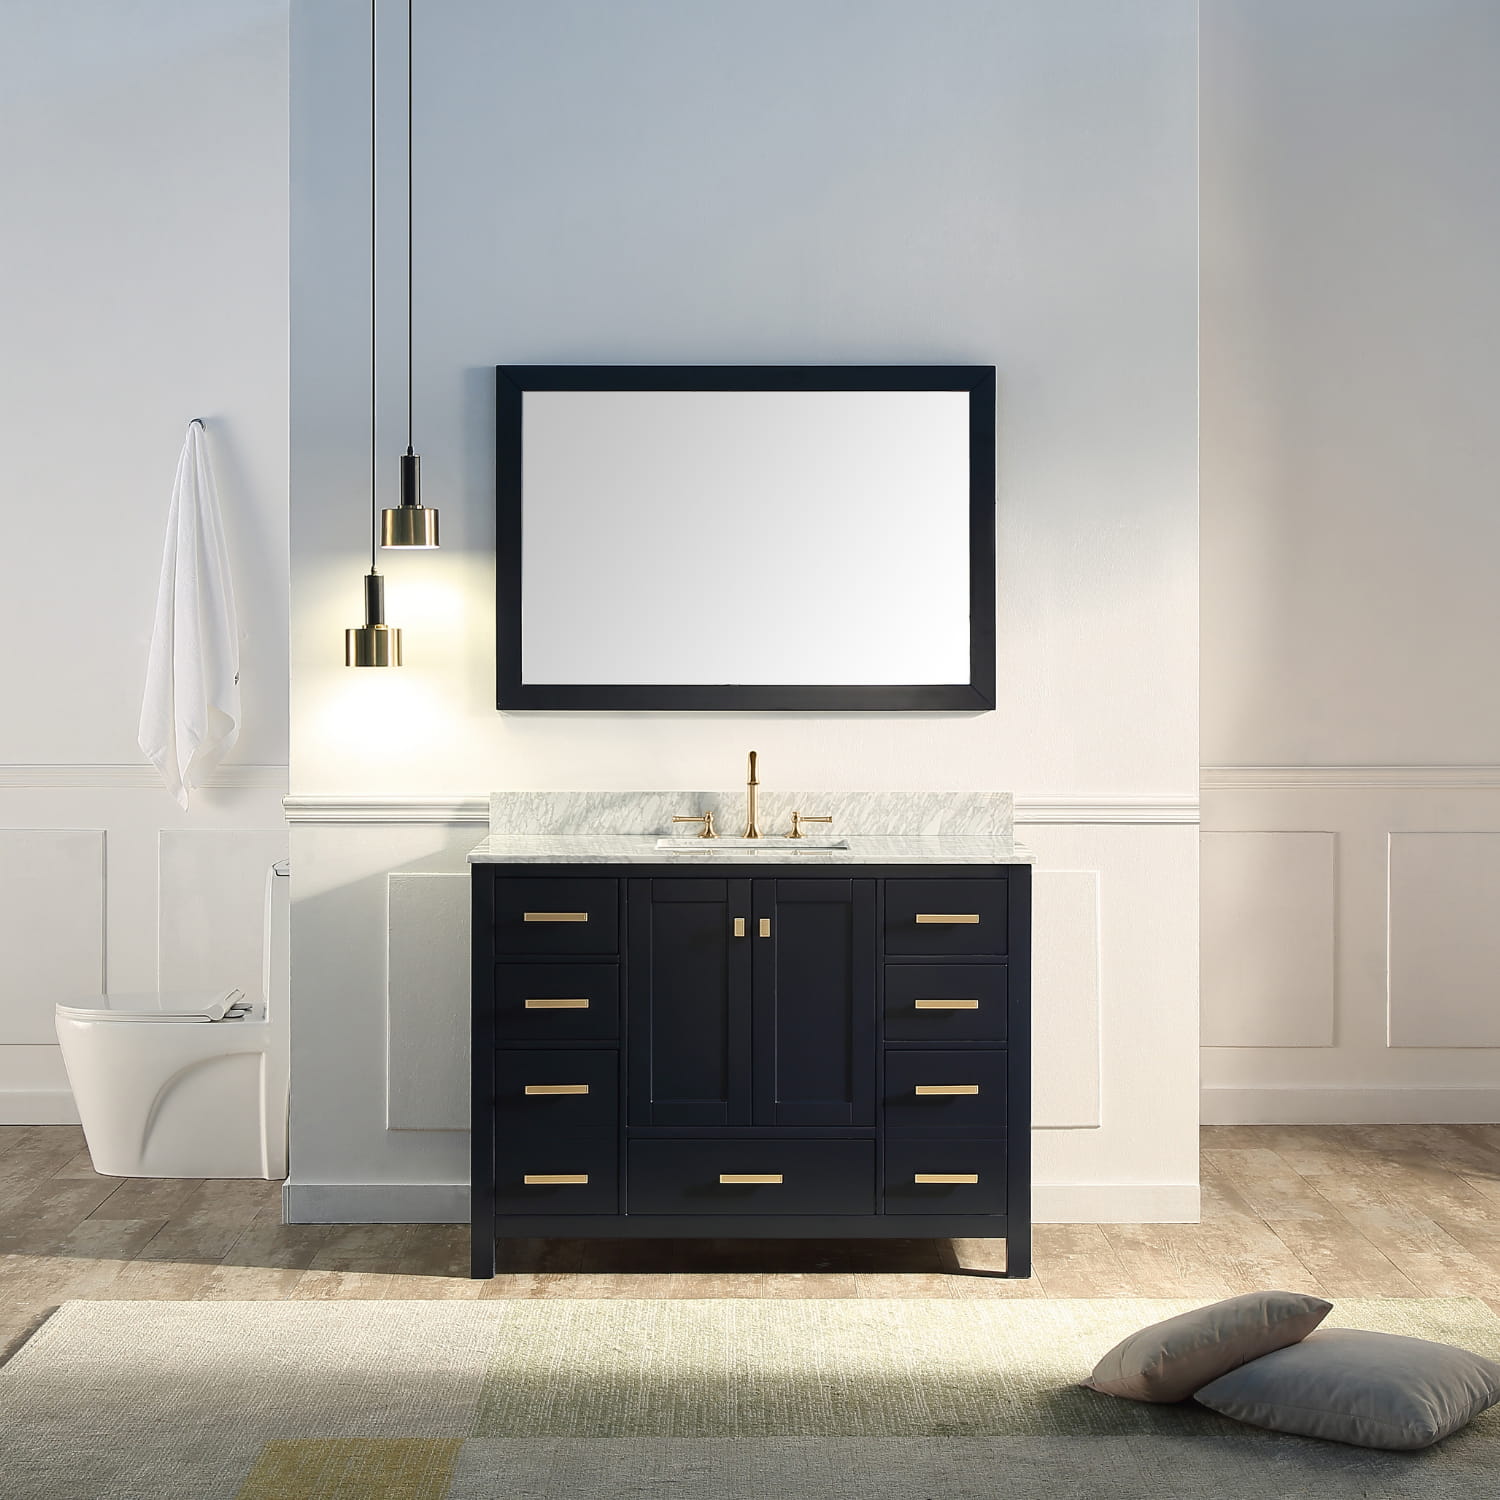 CASAINC 48 x 20 x 35.4 in. Bathroom Vanity with Carrara White Marble Countertop in Navy Blue with Mirror